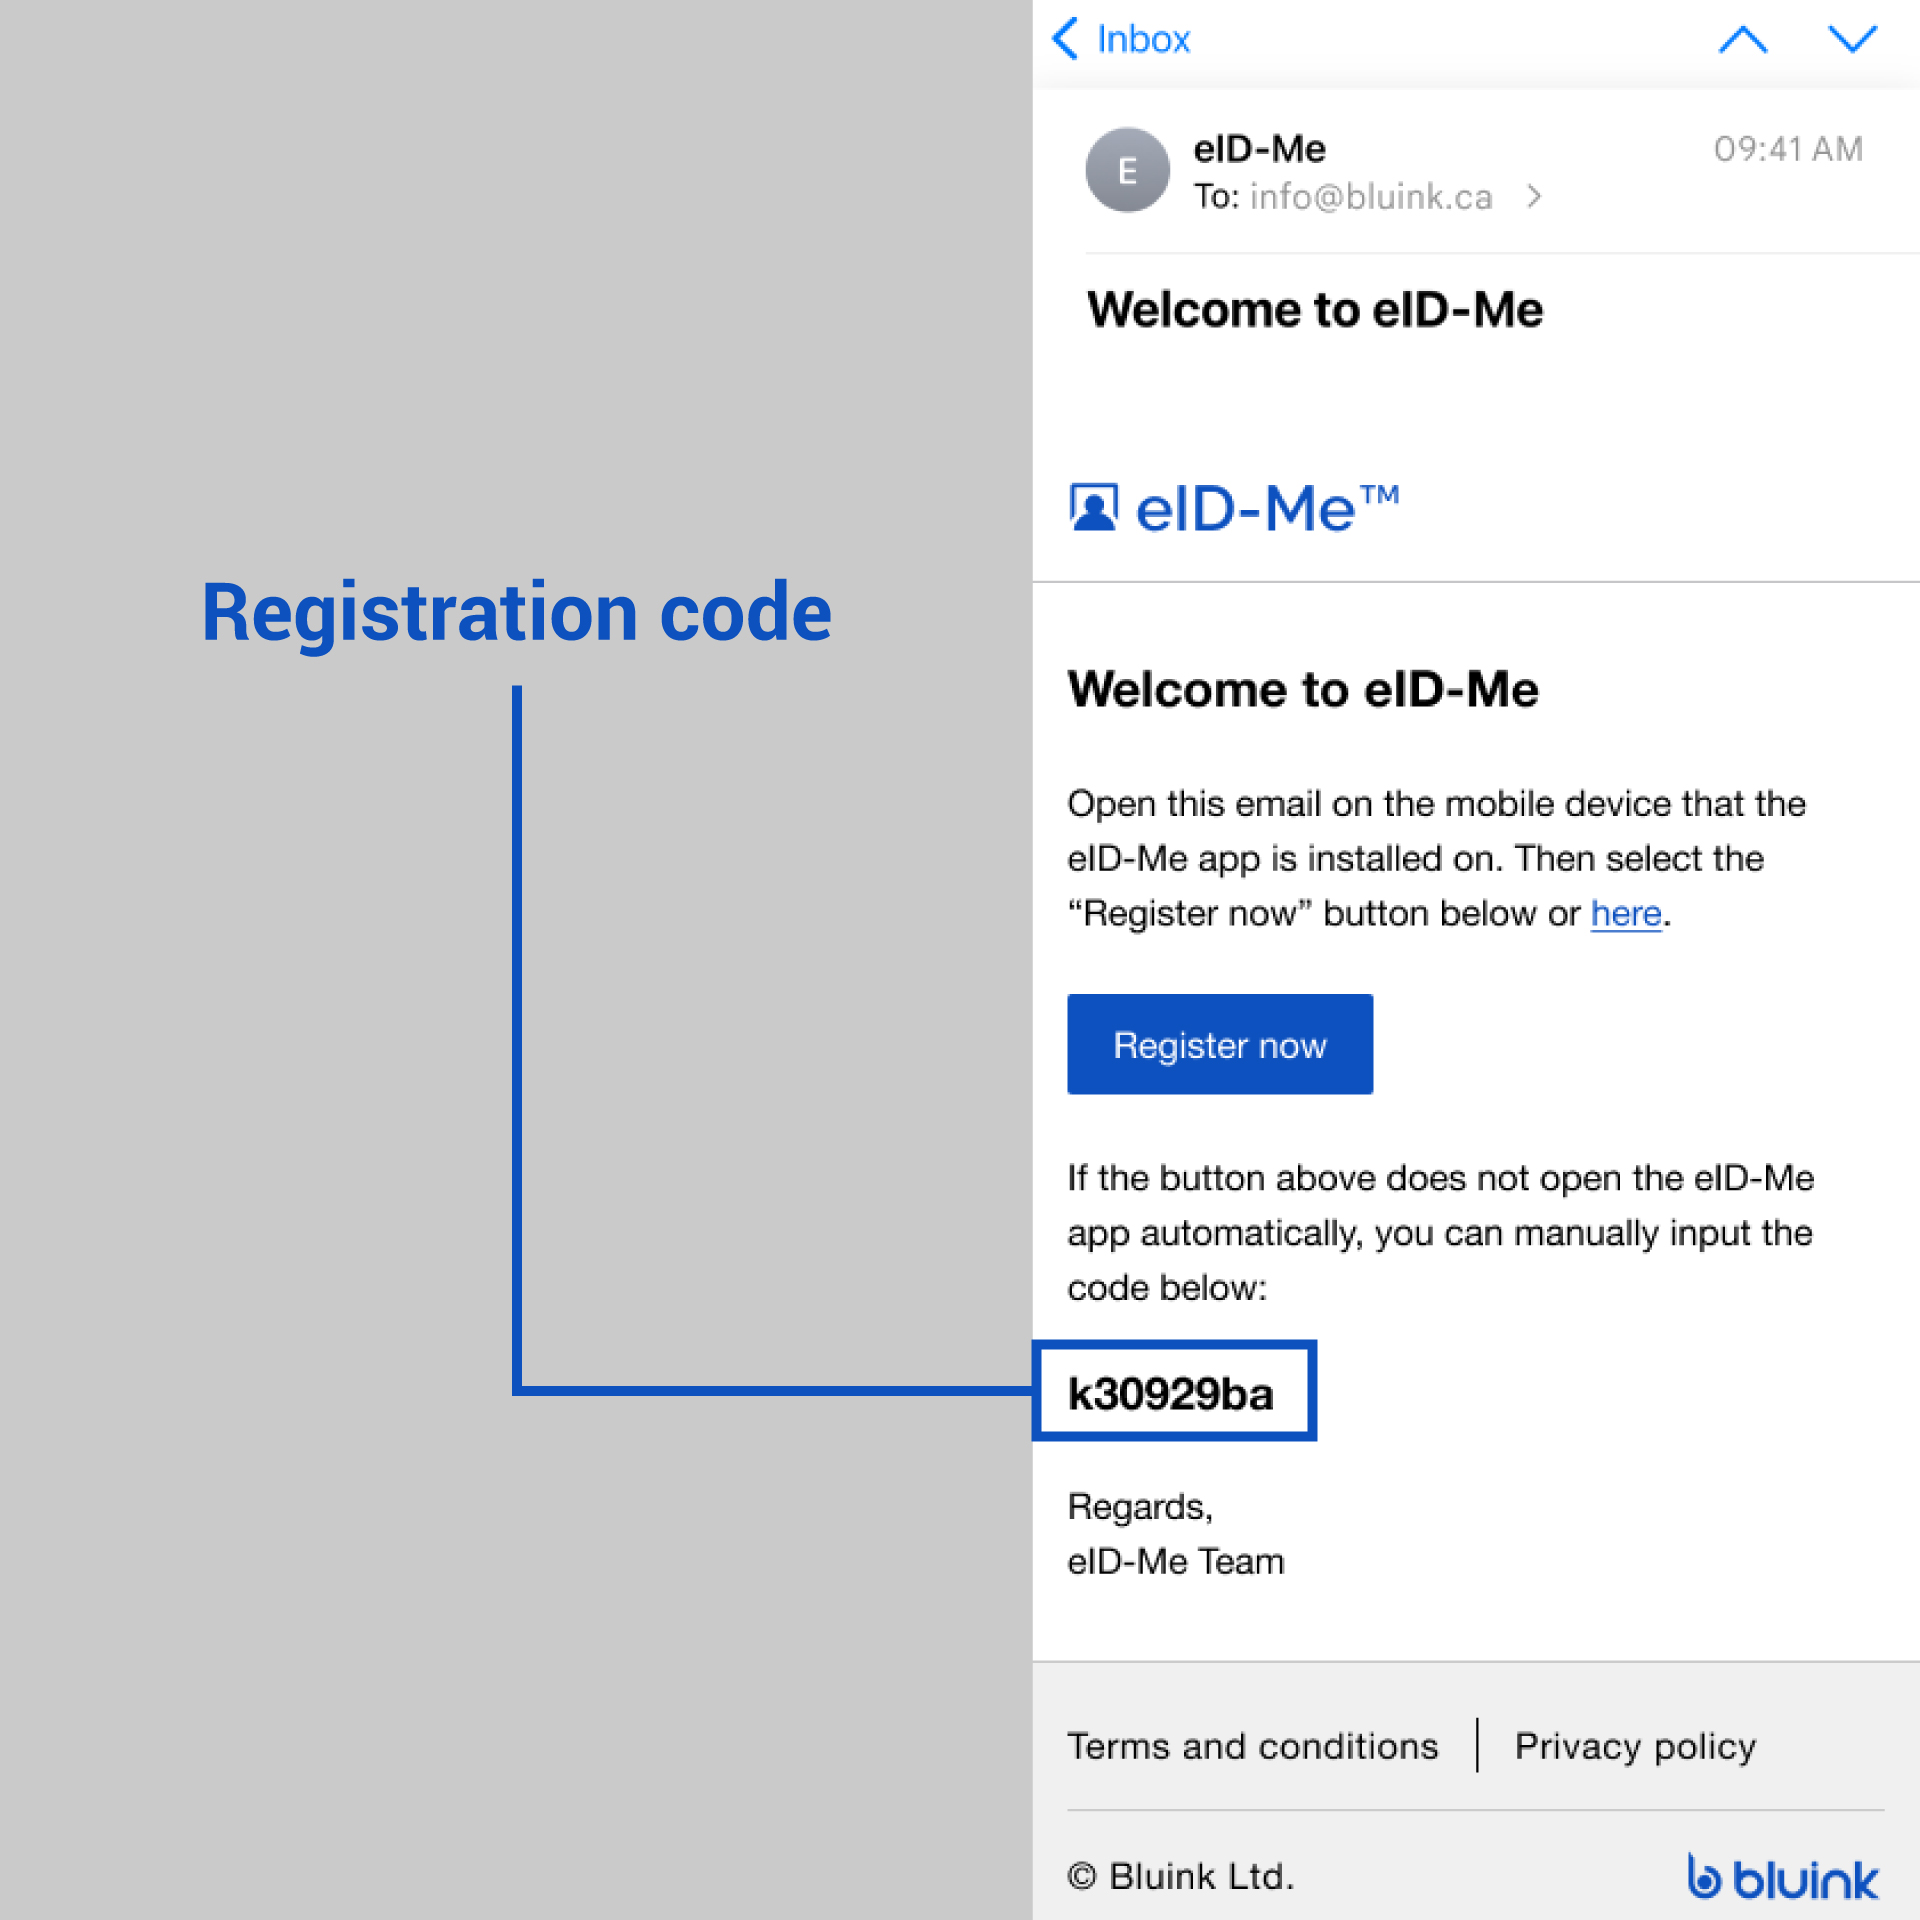 The eID-Me registration code is in bold at the bottom of the email.